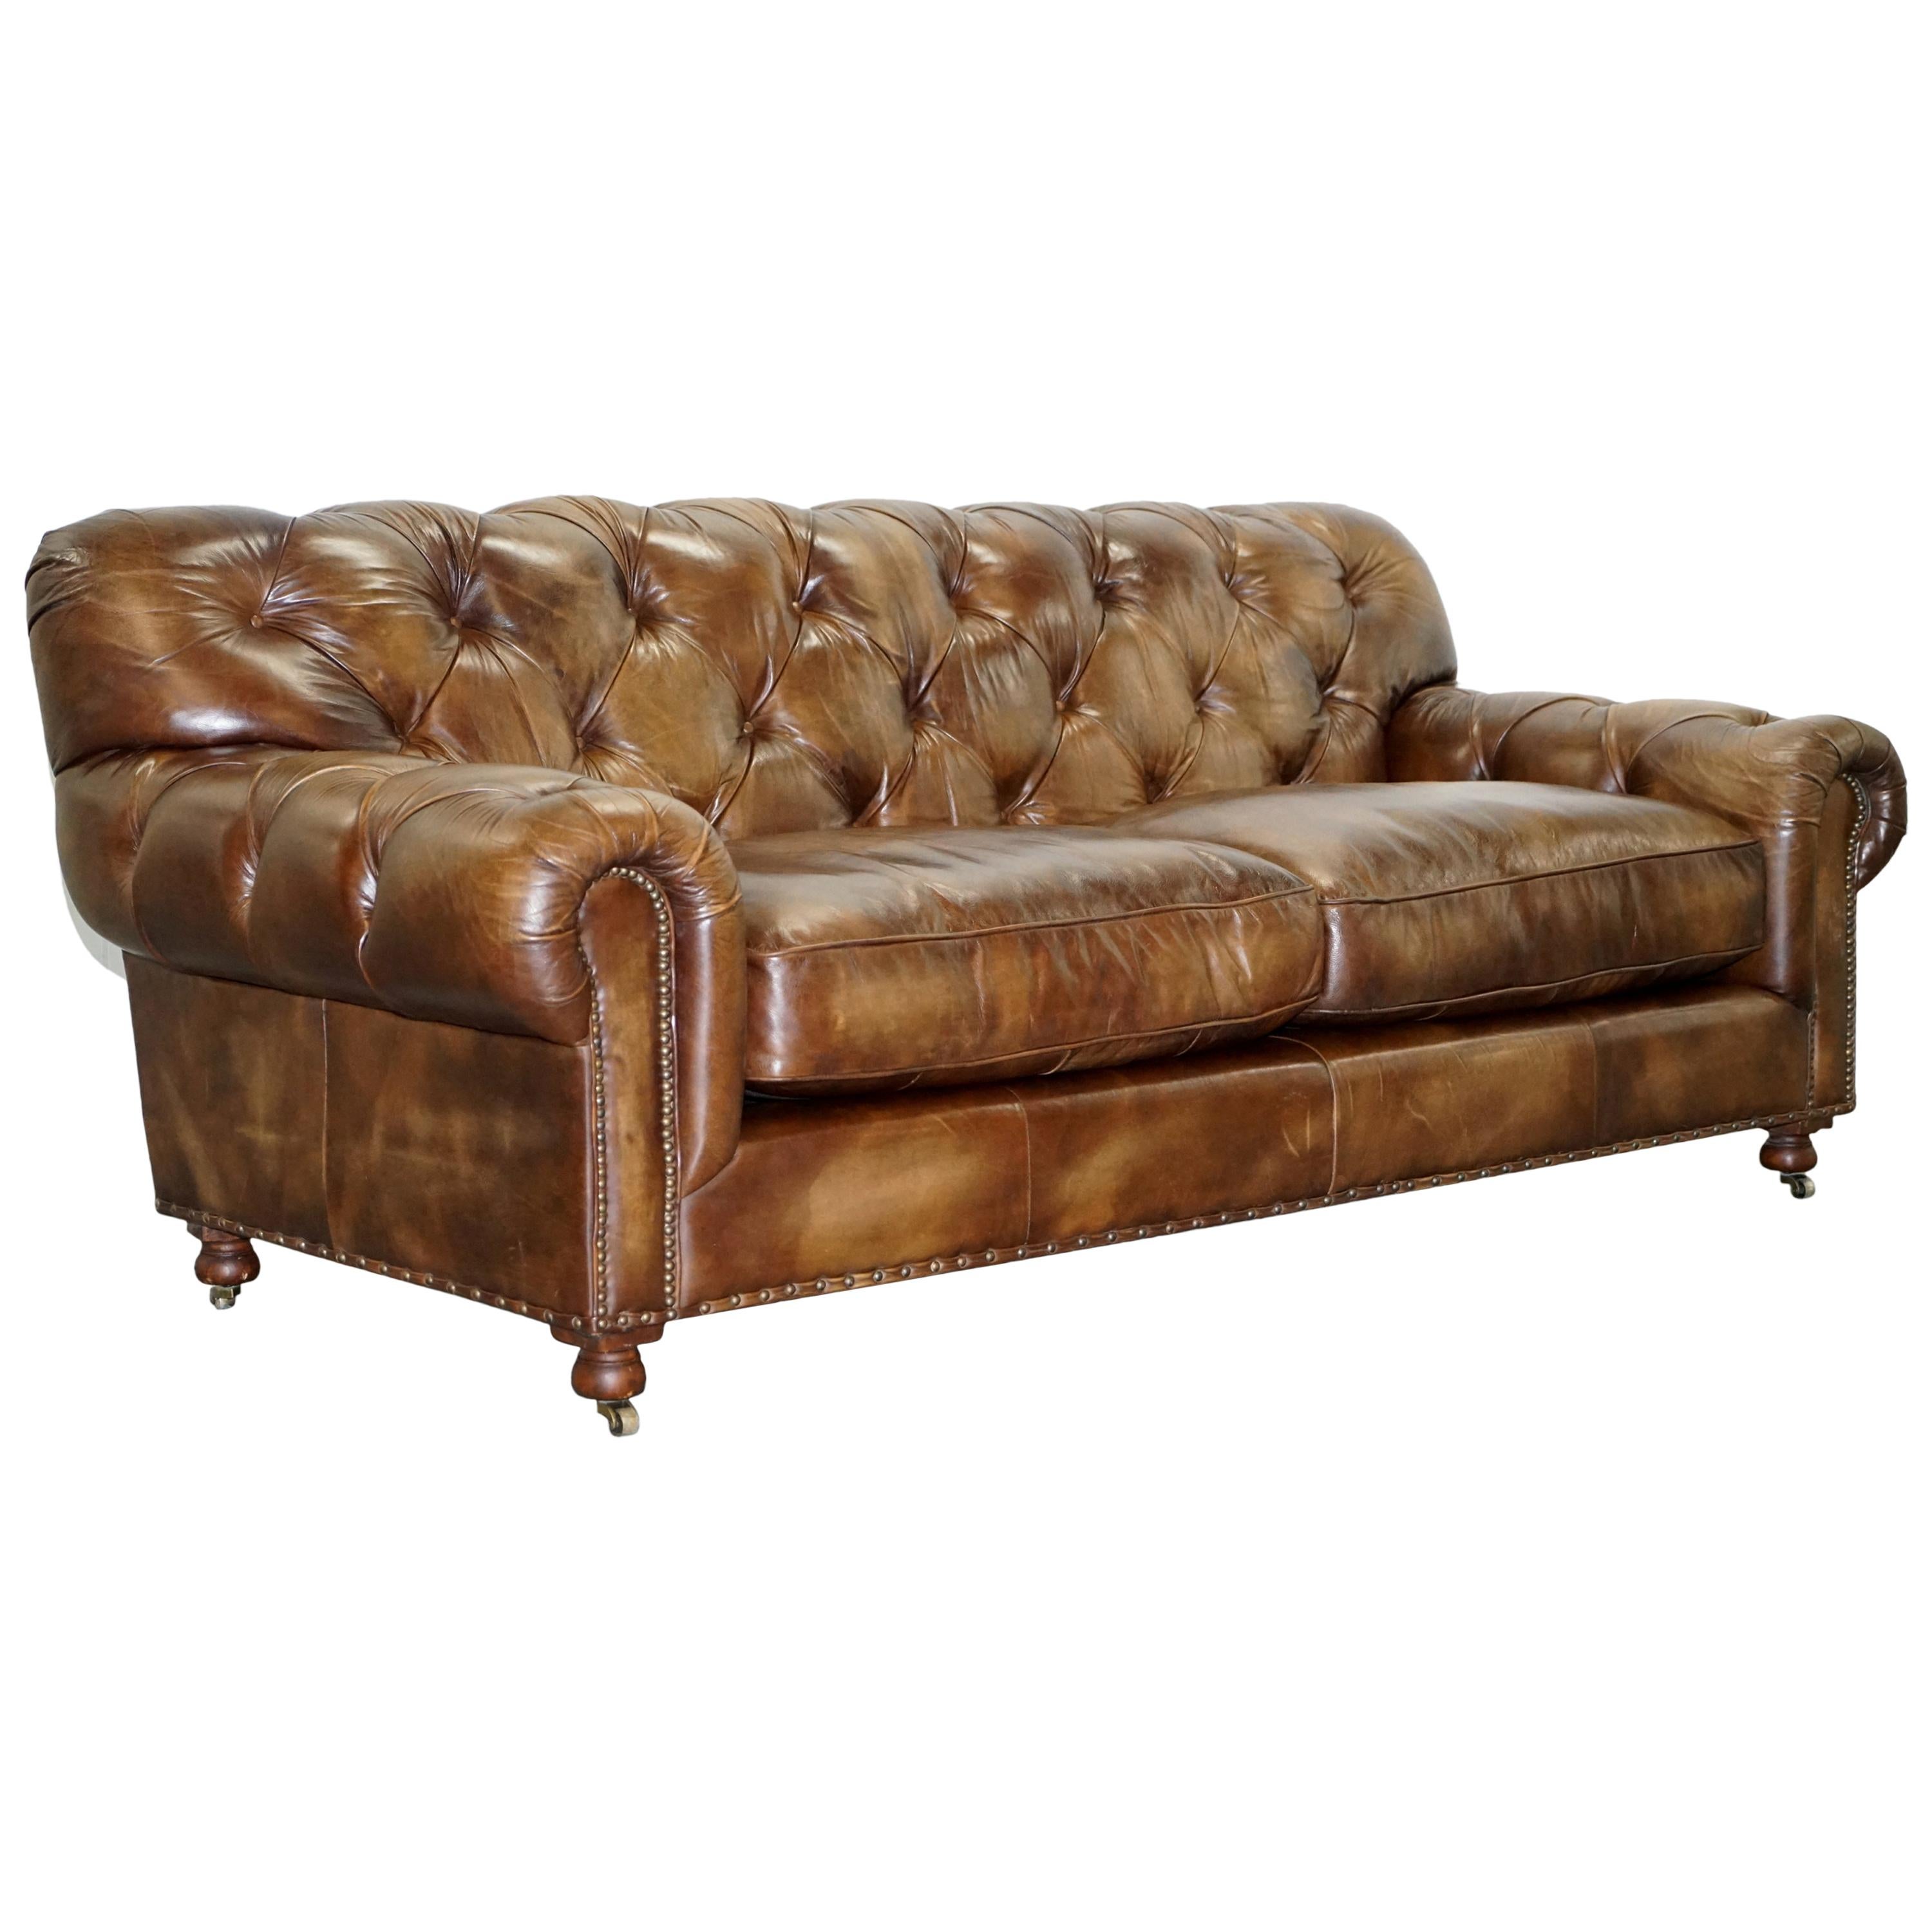 Timothy Oulton Chesterfield Brown Leather Large Sofa Feather Cushions